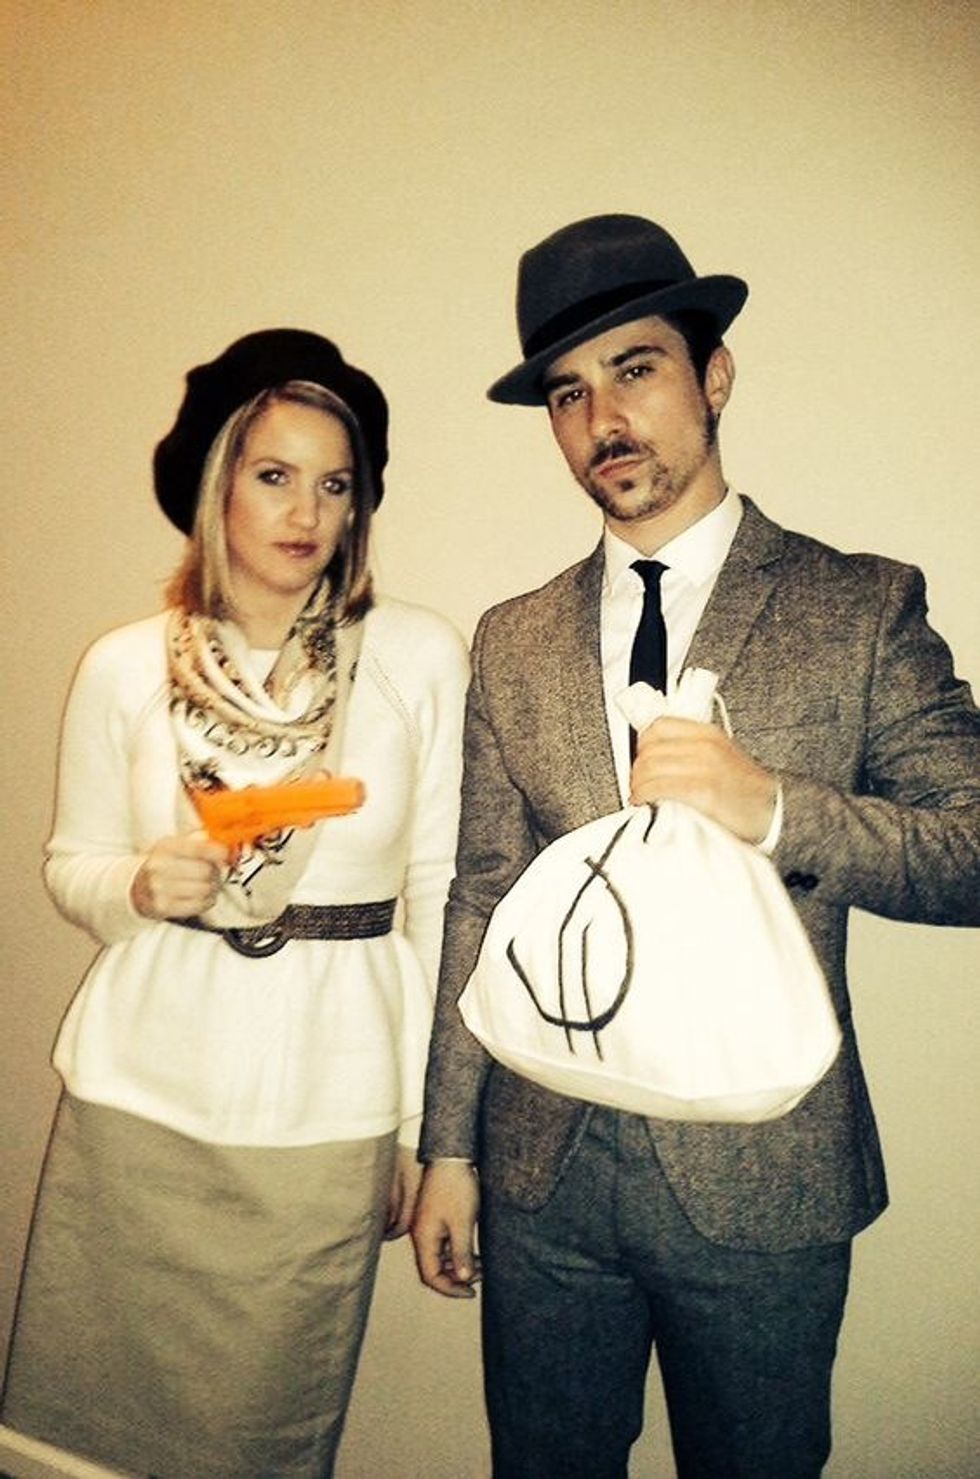 bonnie and clyde costumes homemade